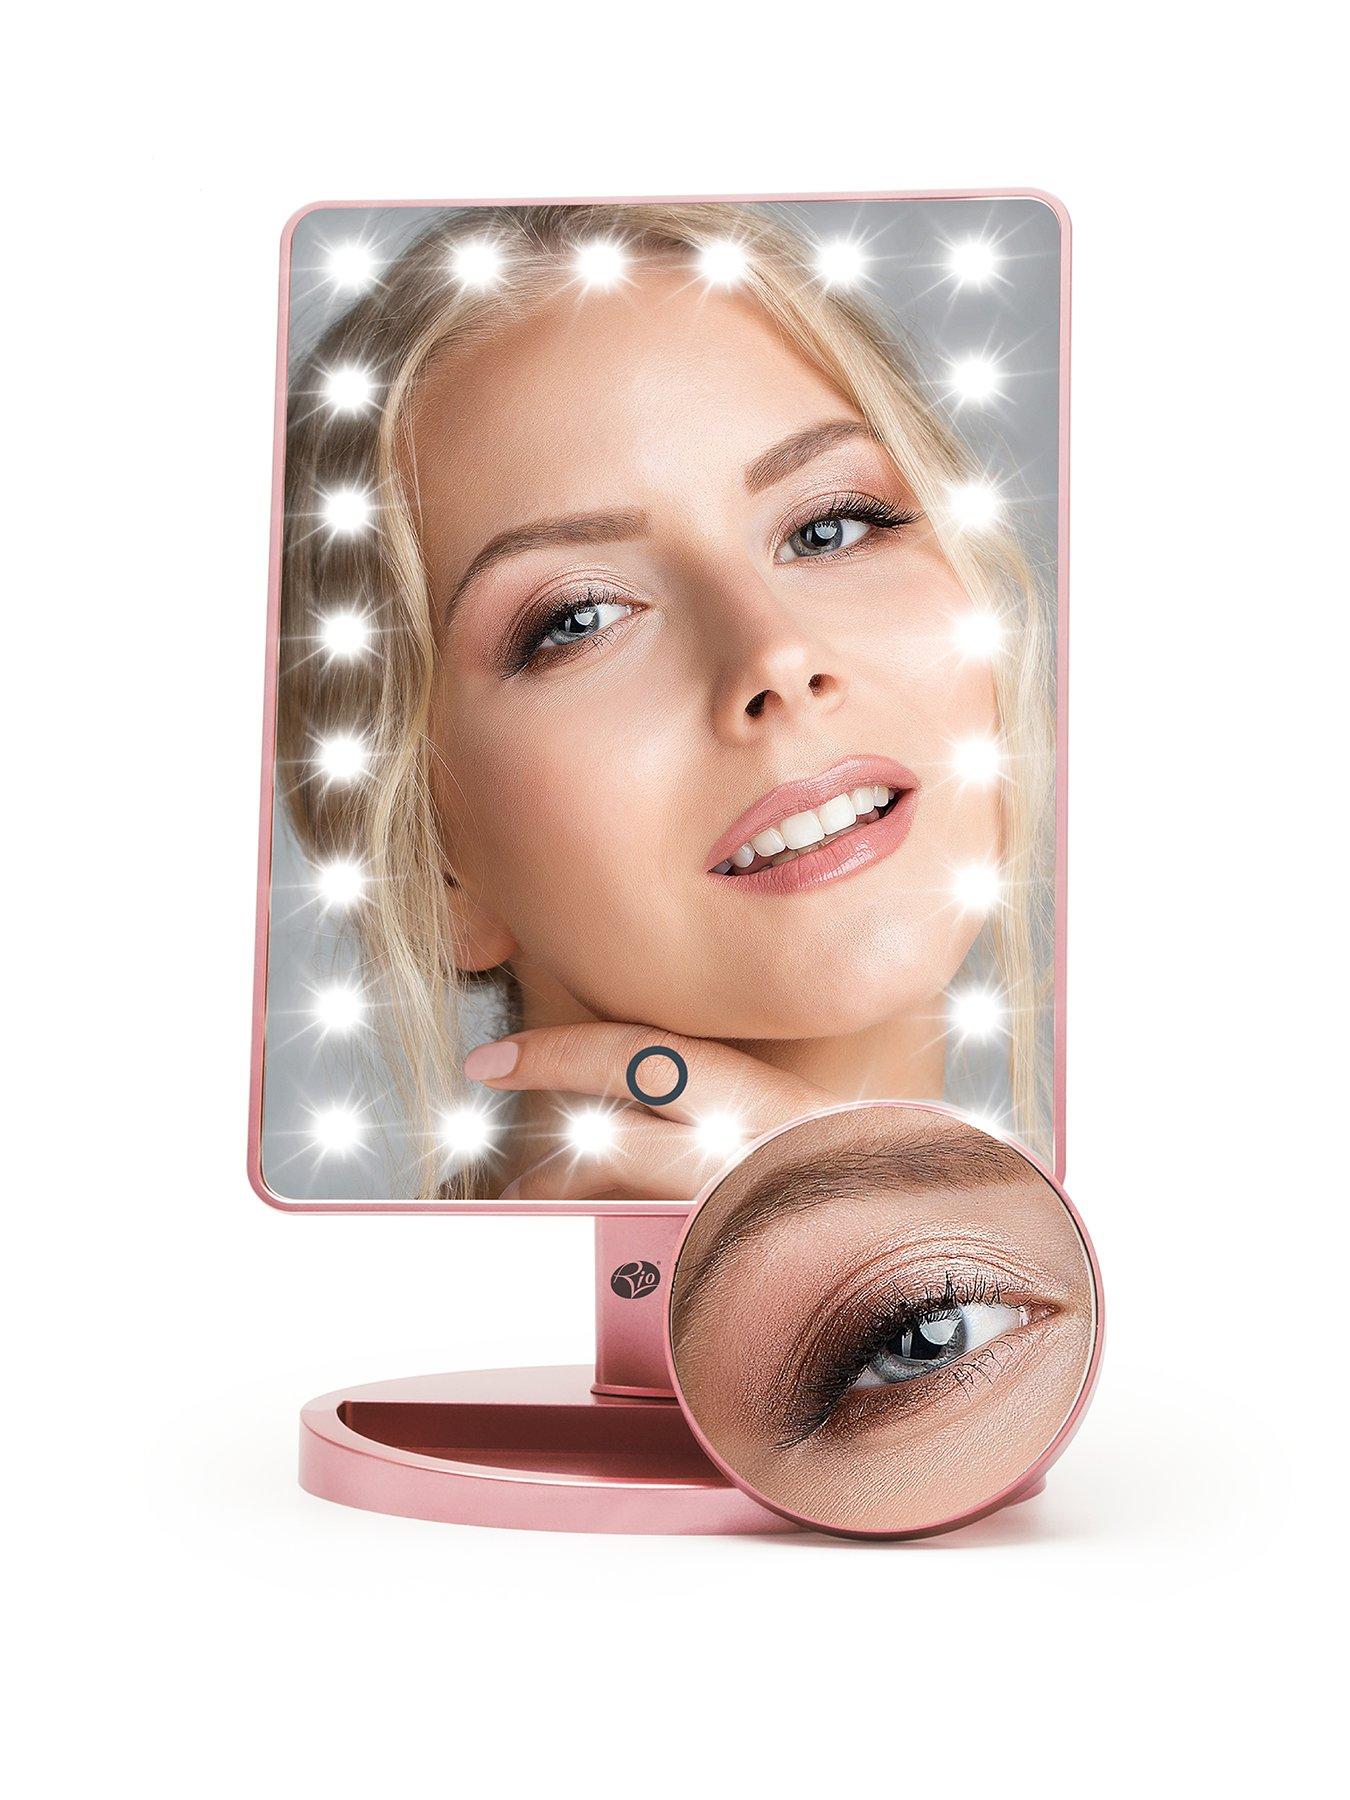 Ultimate Beauty Storage Box With Dimmable Mirror - Rio the Beauty  Specialists